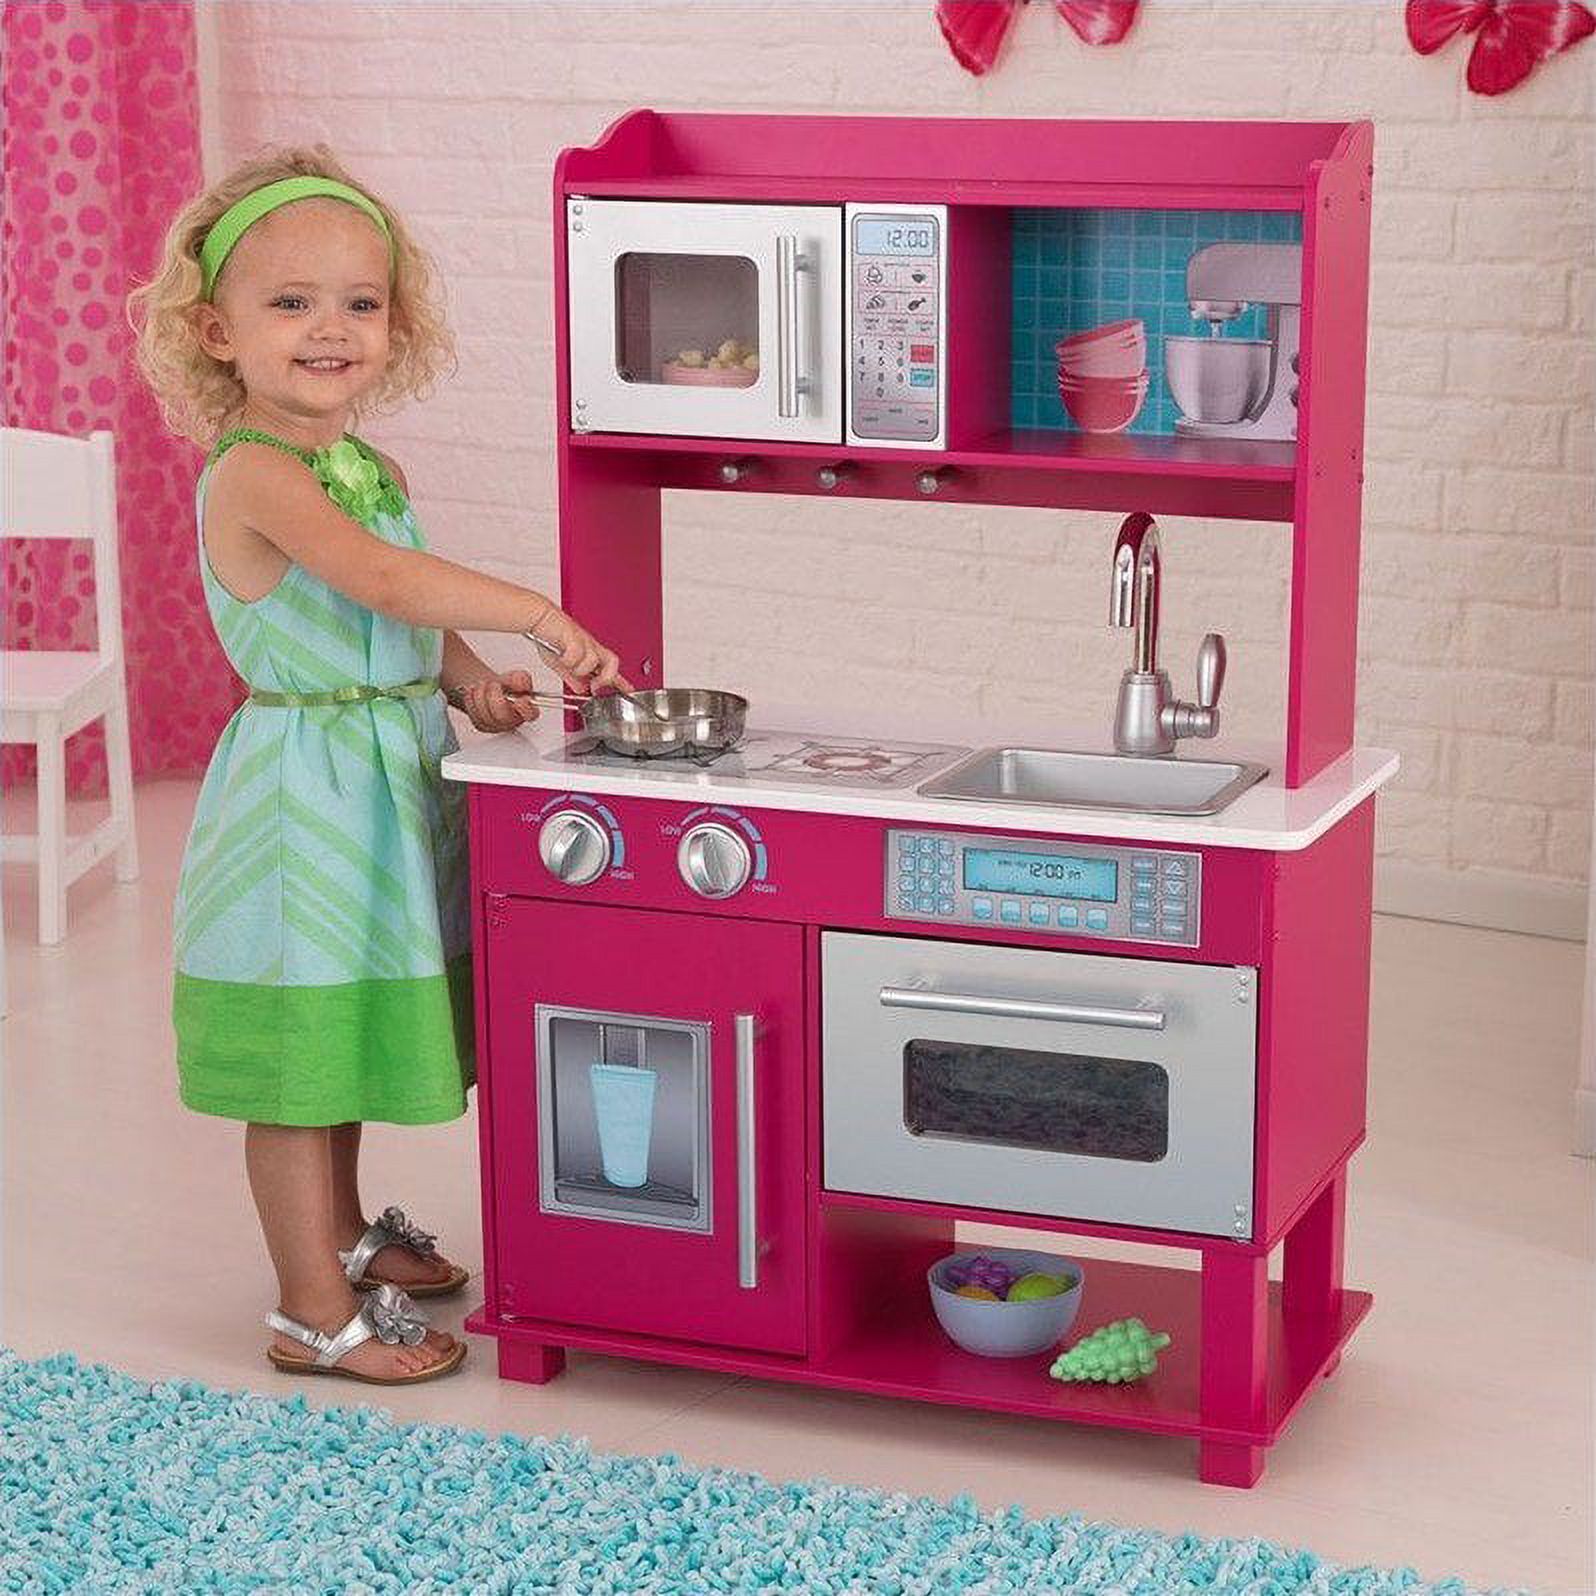 Gracie Play Kitchen - image 1 of 3